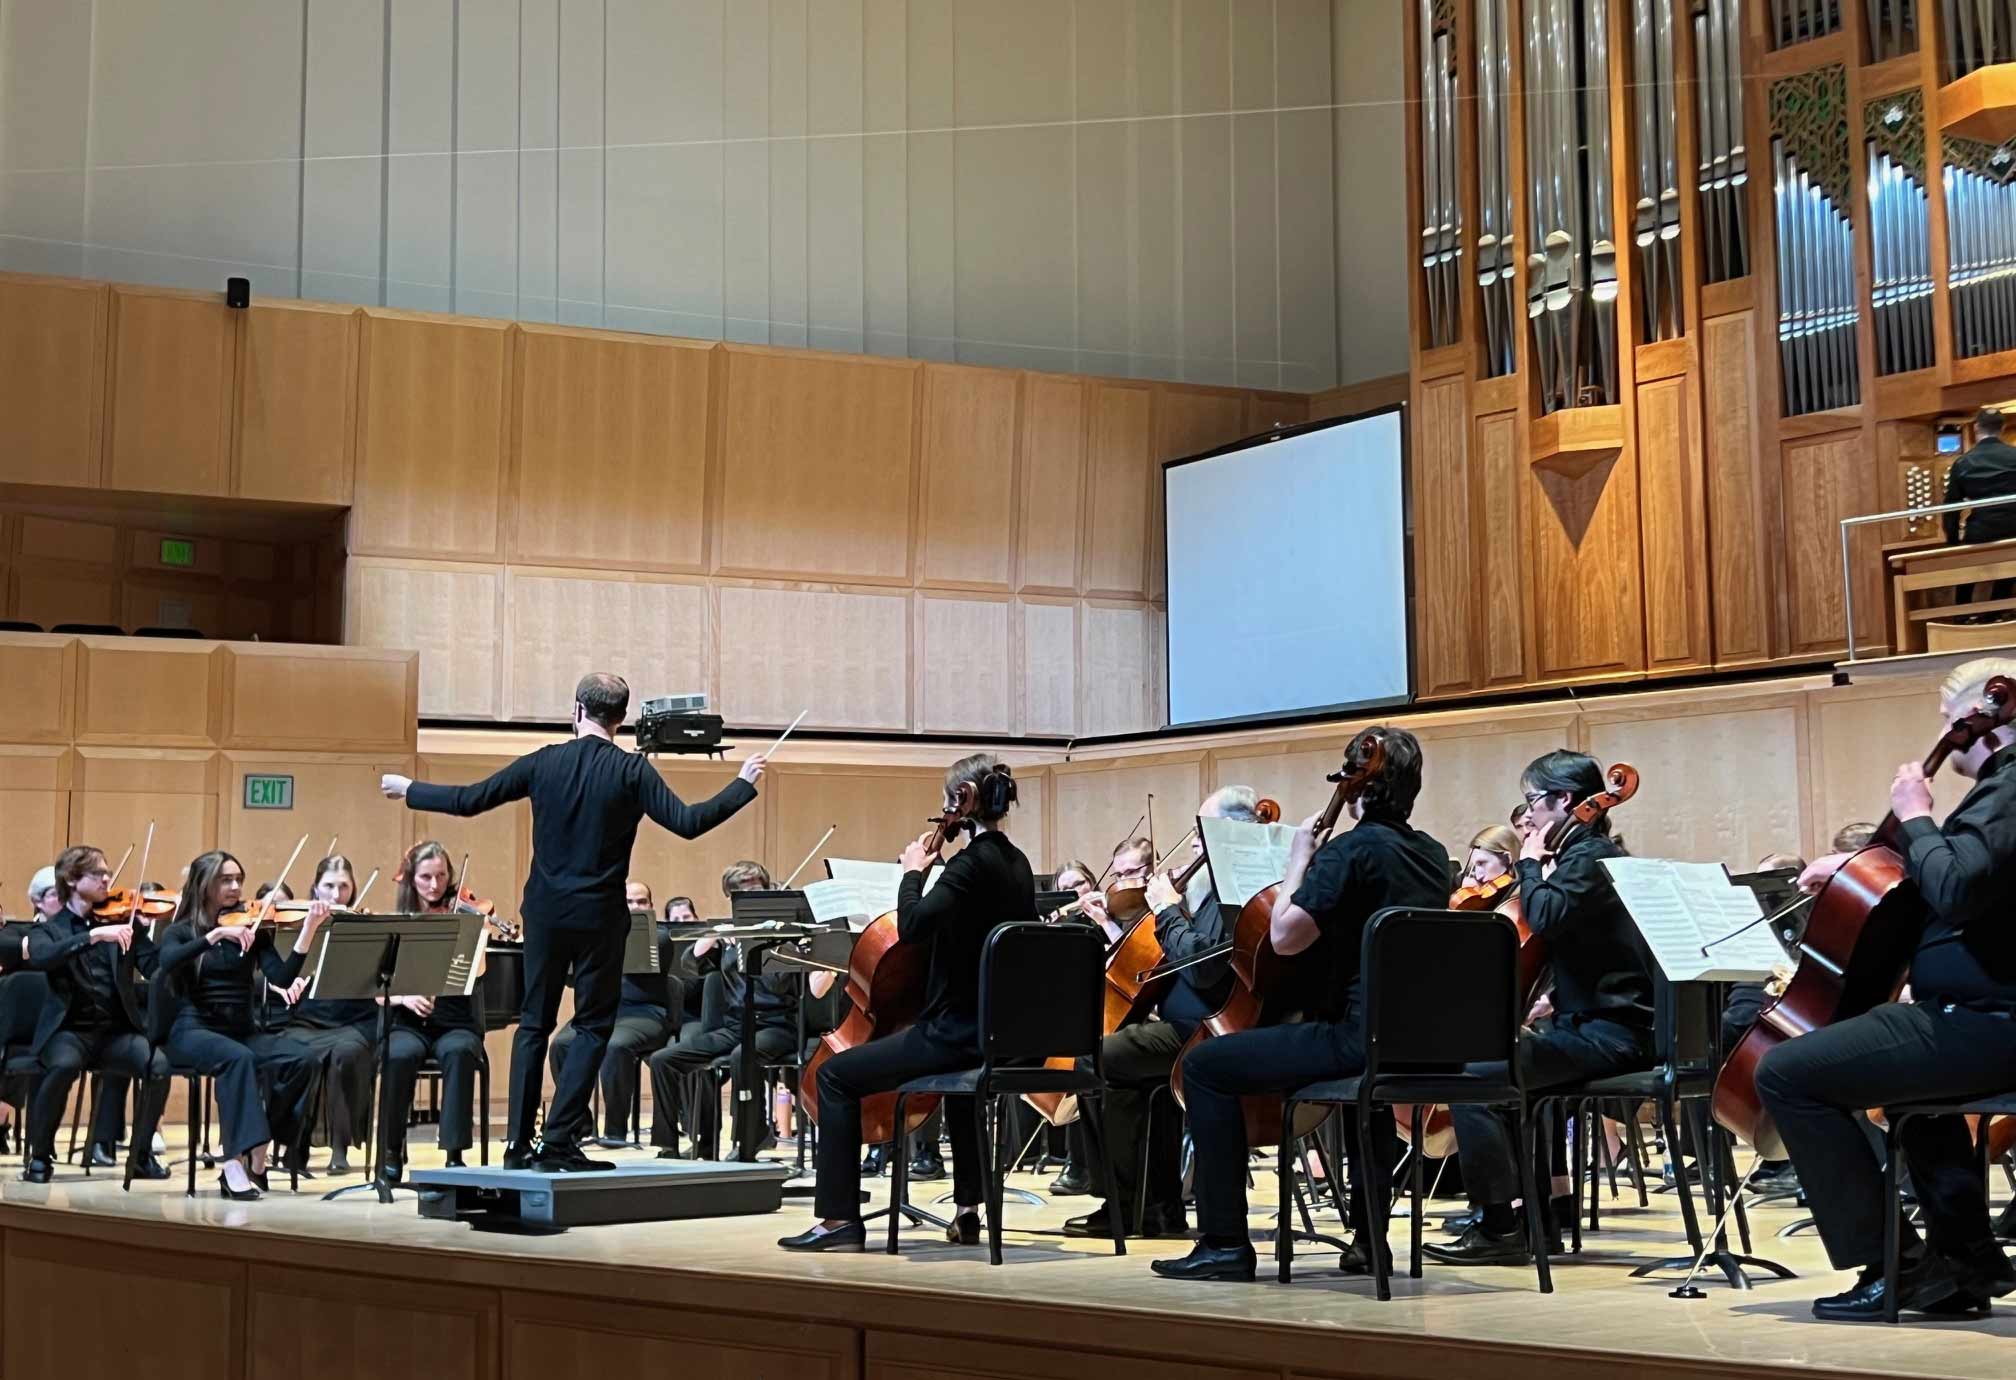 The Utah Medical Orchestra performing in a concert hall.